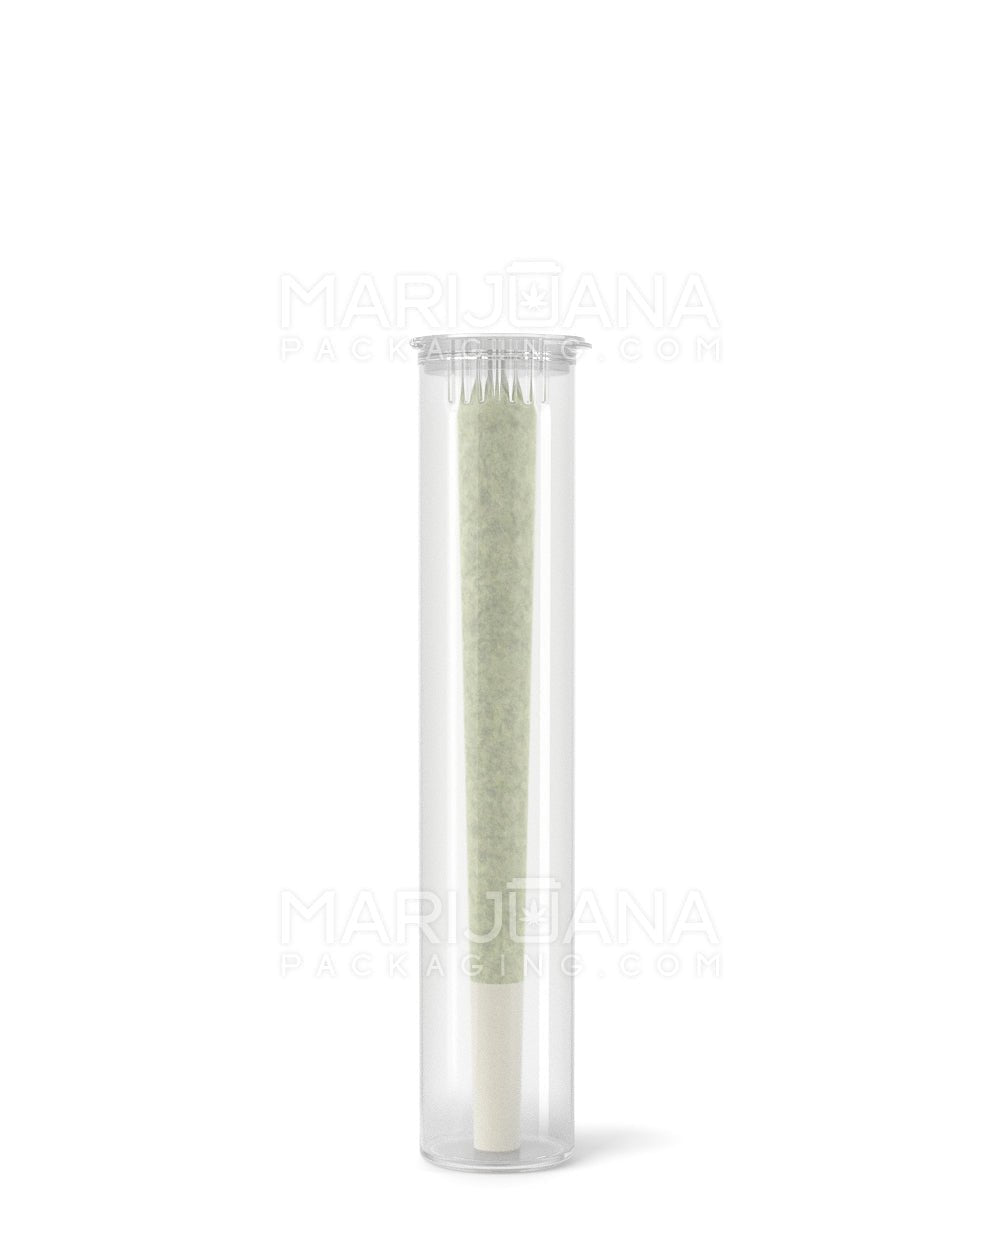 Child Resistant | 100% Biodegradable Pop Top Plastic Pre-Roll Tubes | 98mm - Clear - 1000 Count - 3